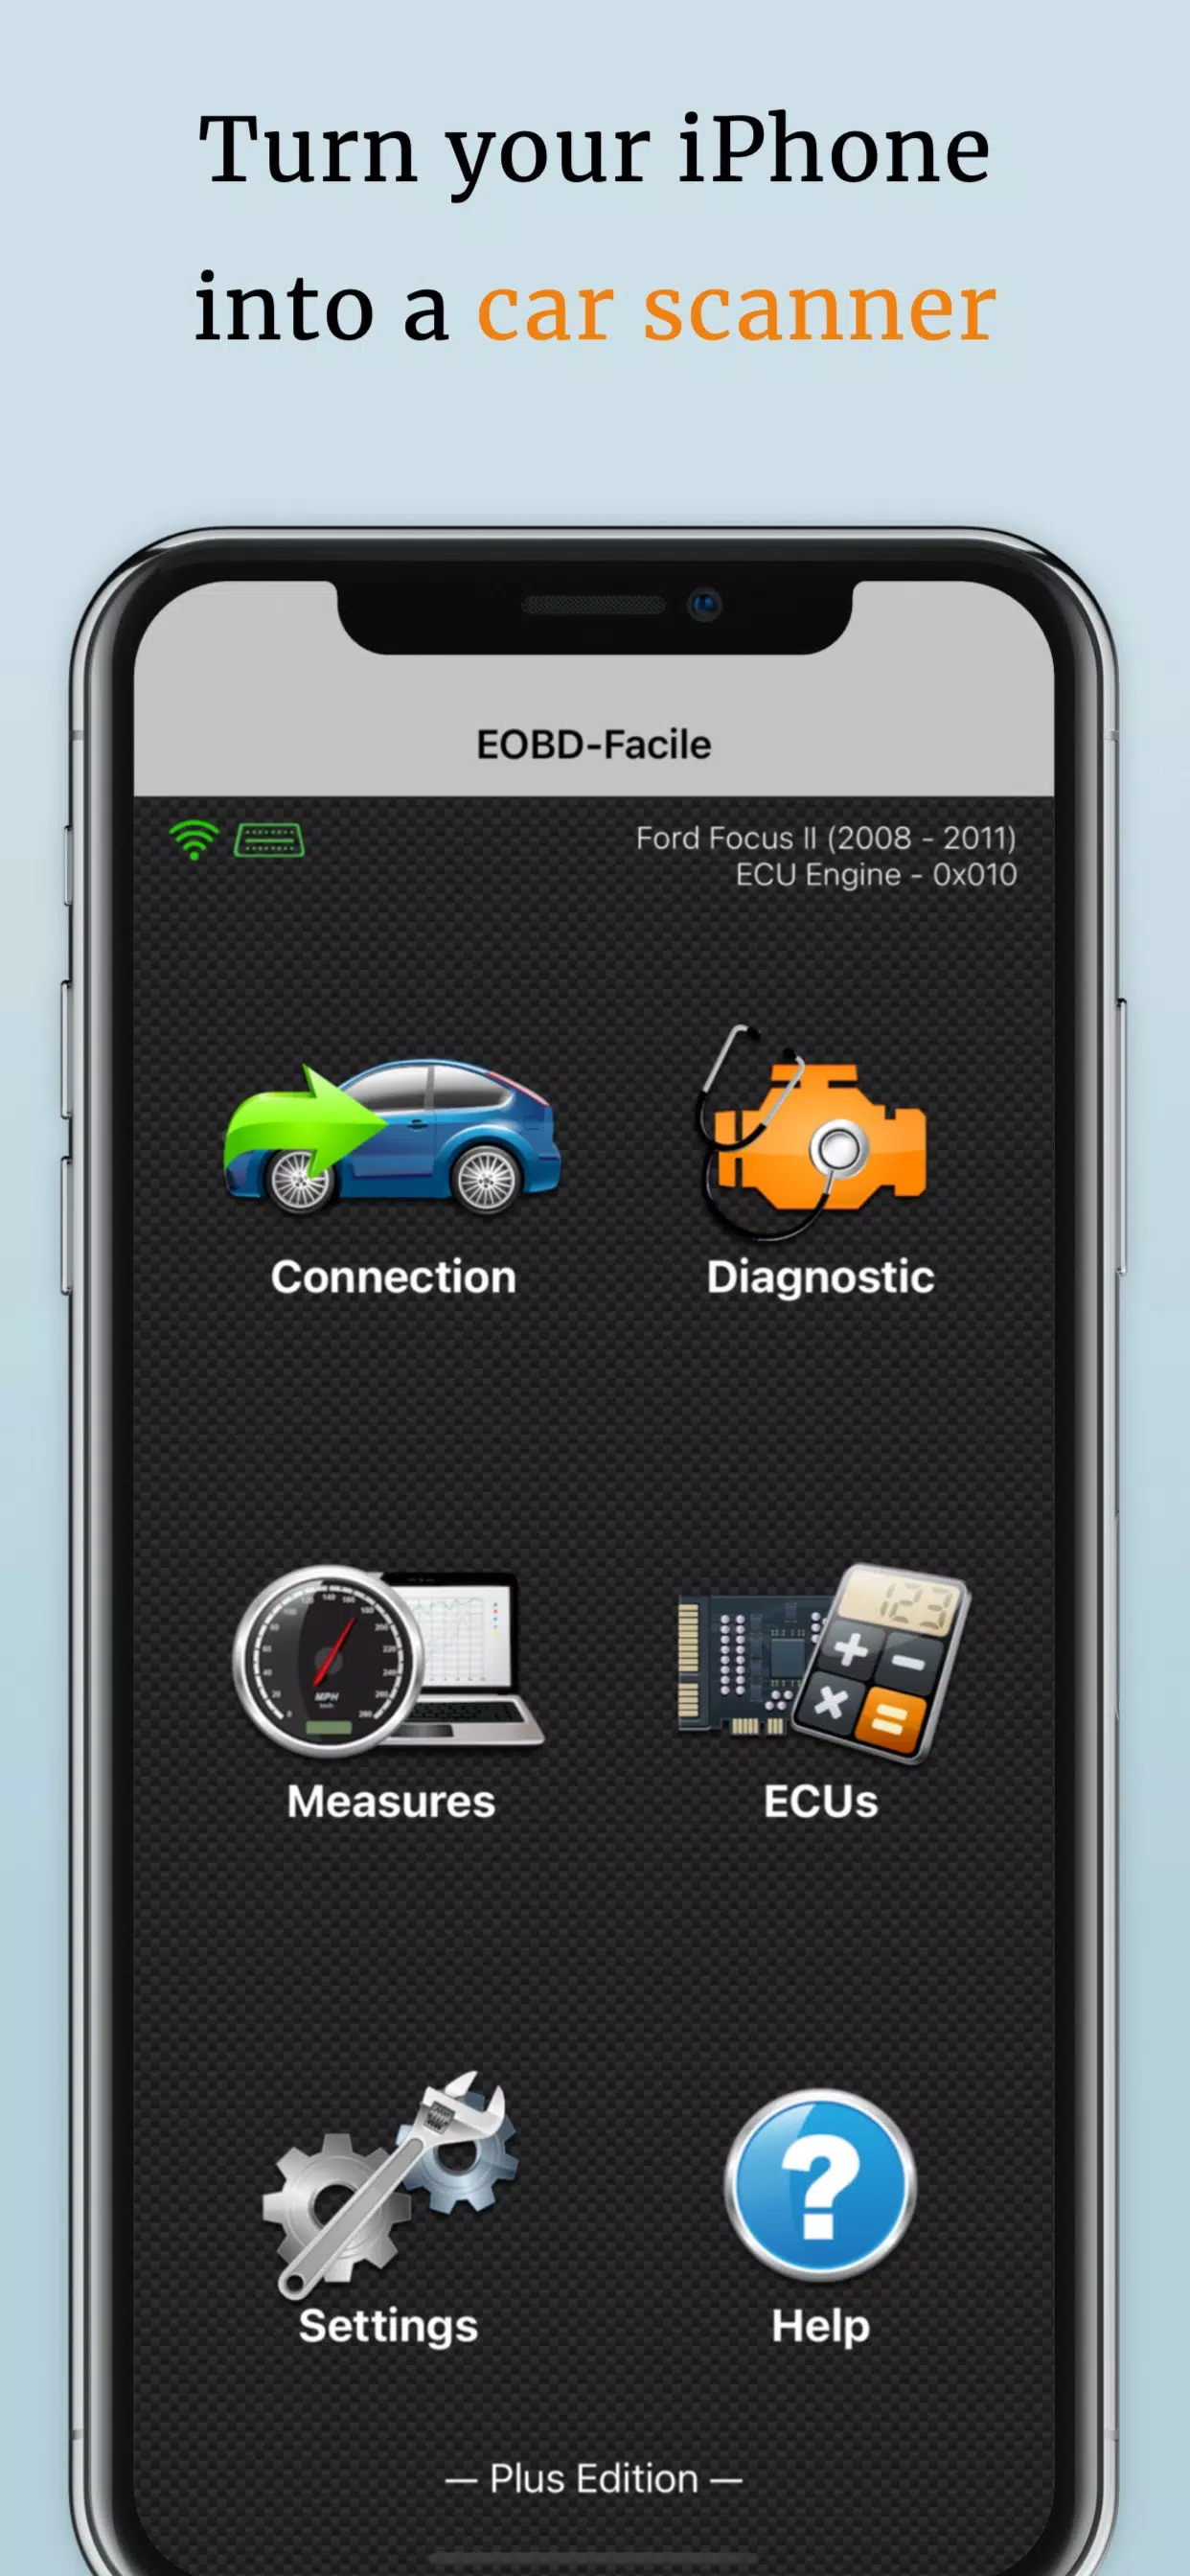 EOBD Facile APK for Android Download